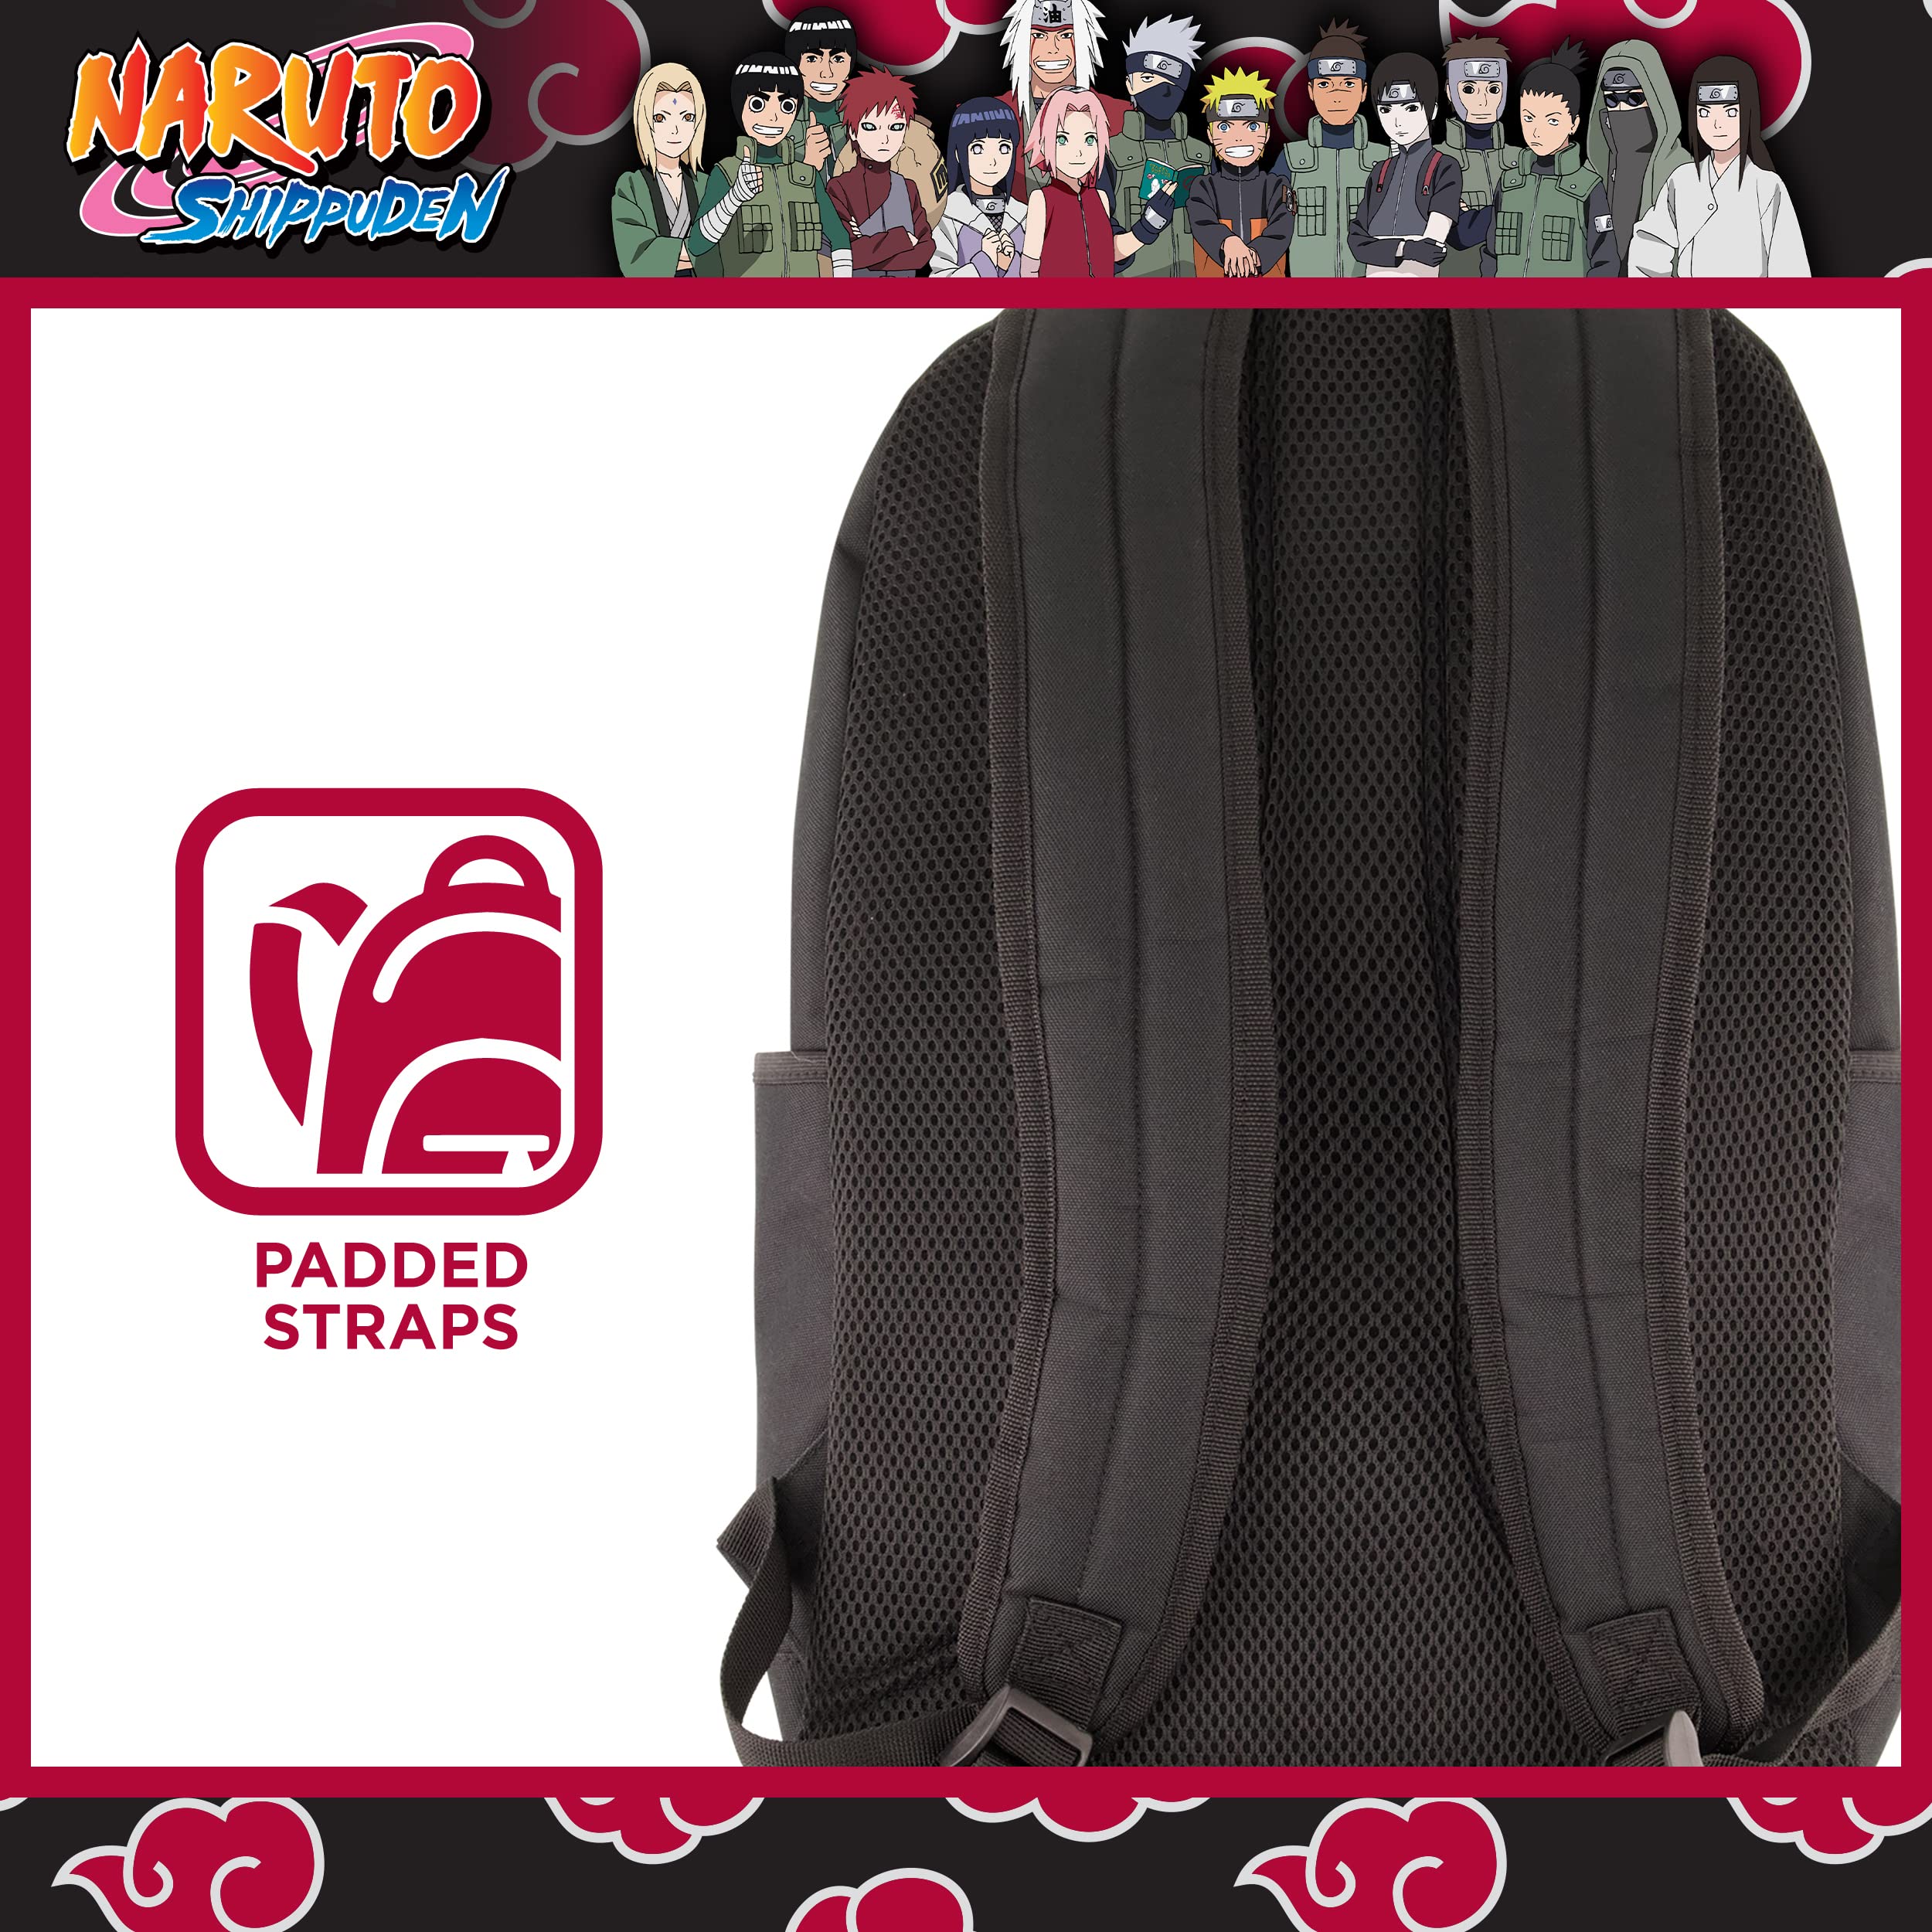 Naruto 13 Inch Sleeve Laptop Backpack, Padded Computer Bag for Commute or Travel, Shinobi Headband, One Size